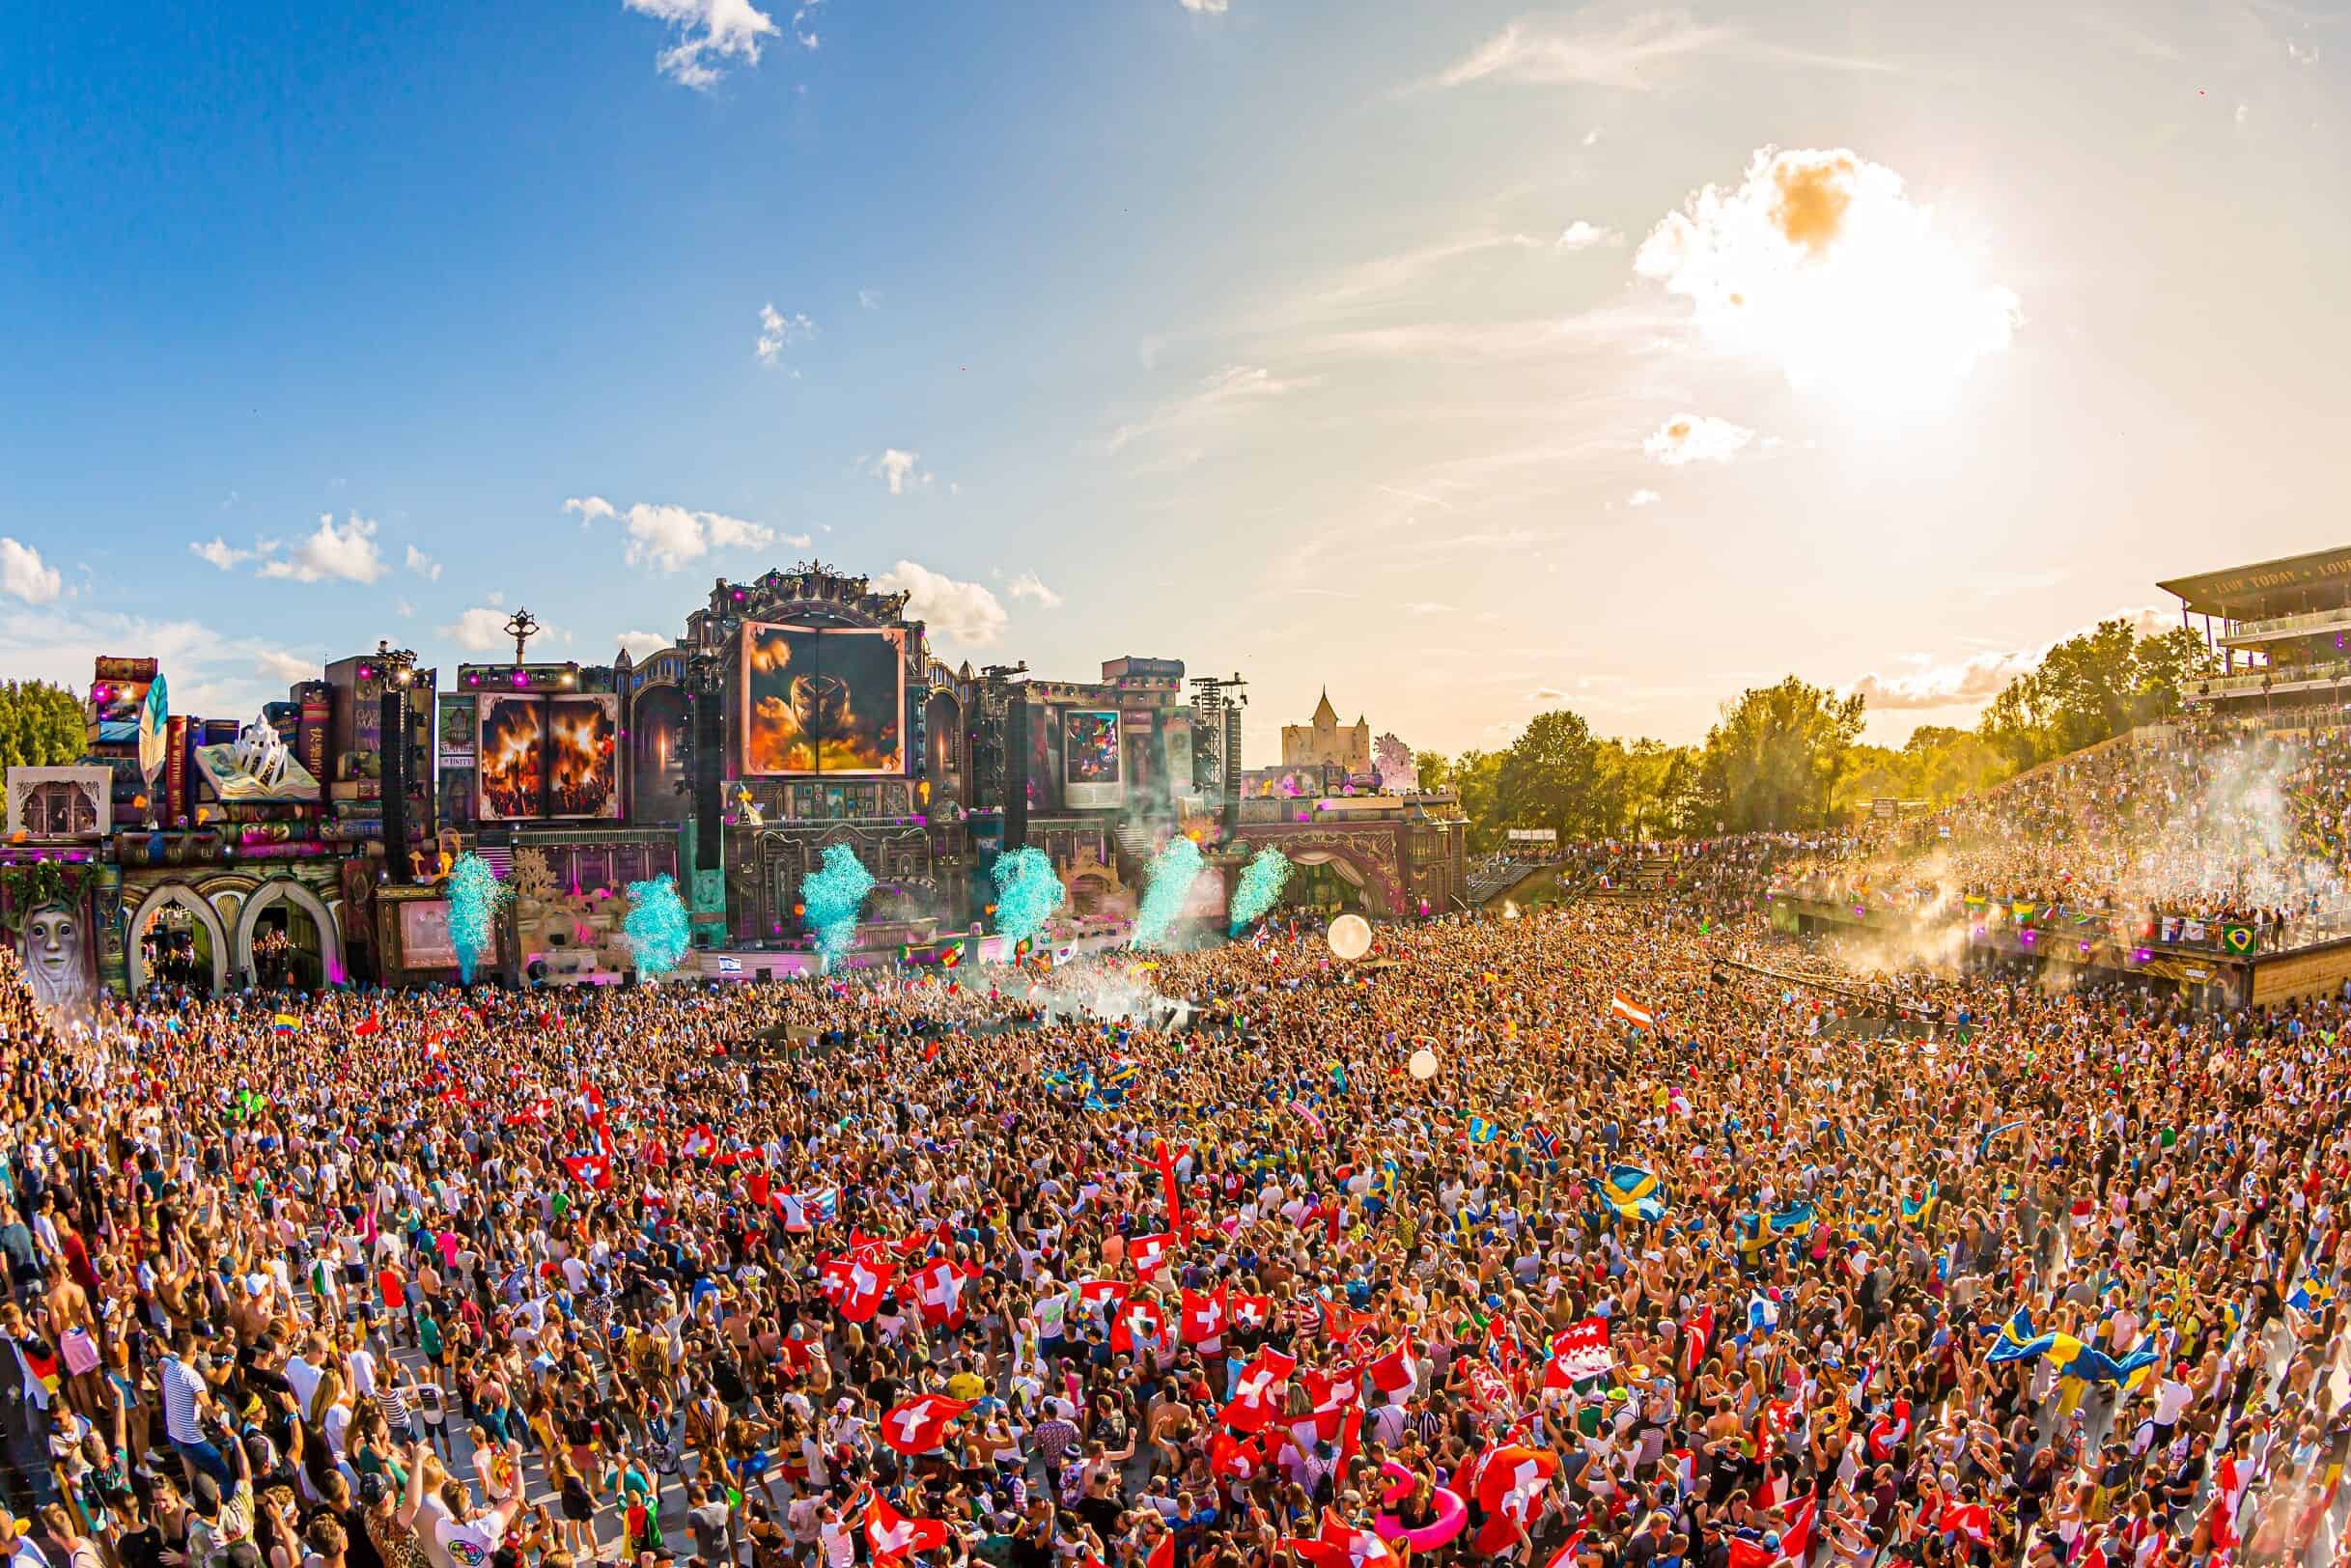 Tomorrowland 2022: New video shows exciting ground preparations for July